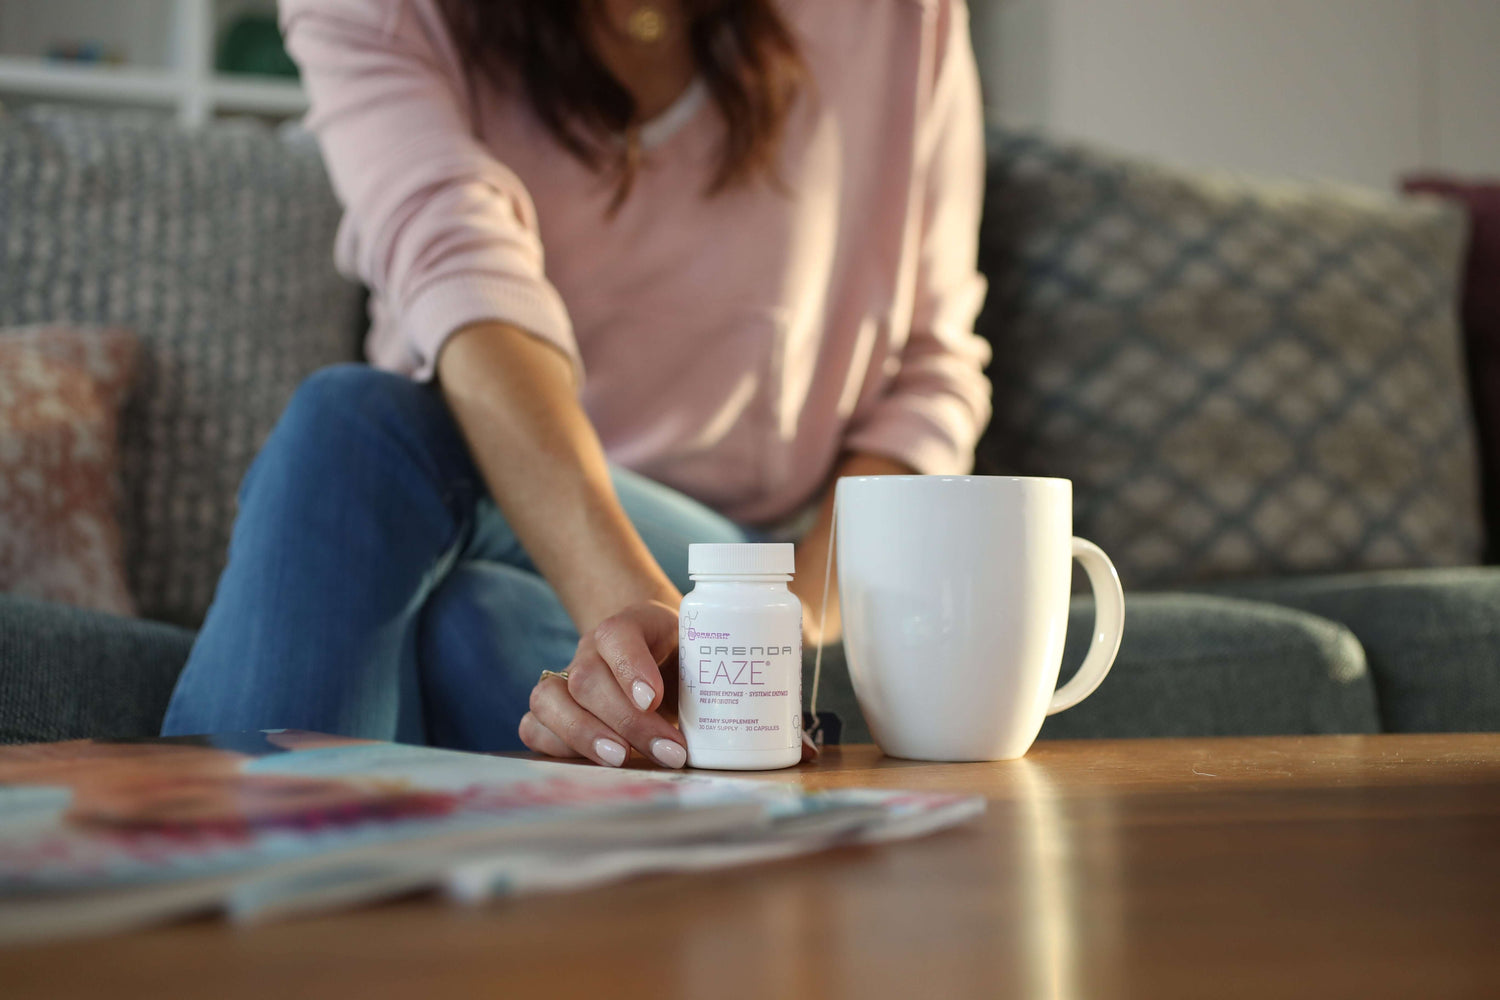 Woman reaching for a bottle of Orenda Eaze on a coffee table next to a cup of tea